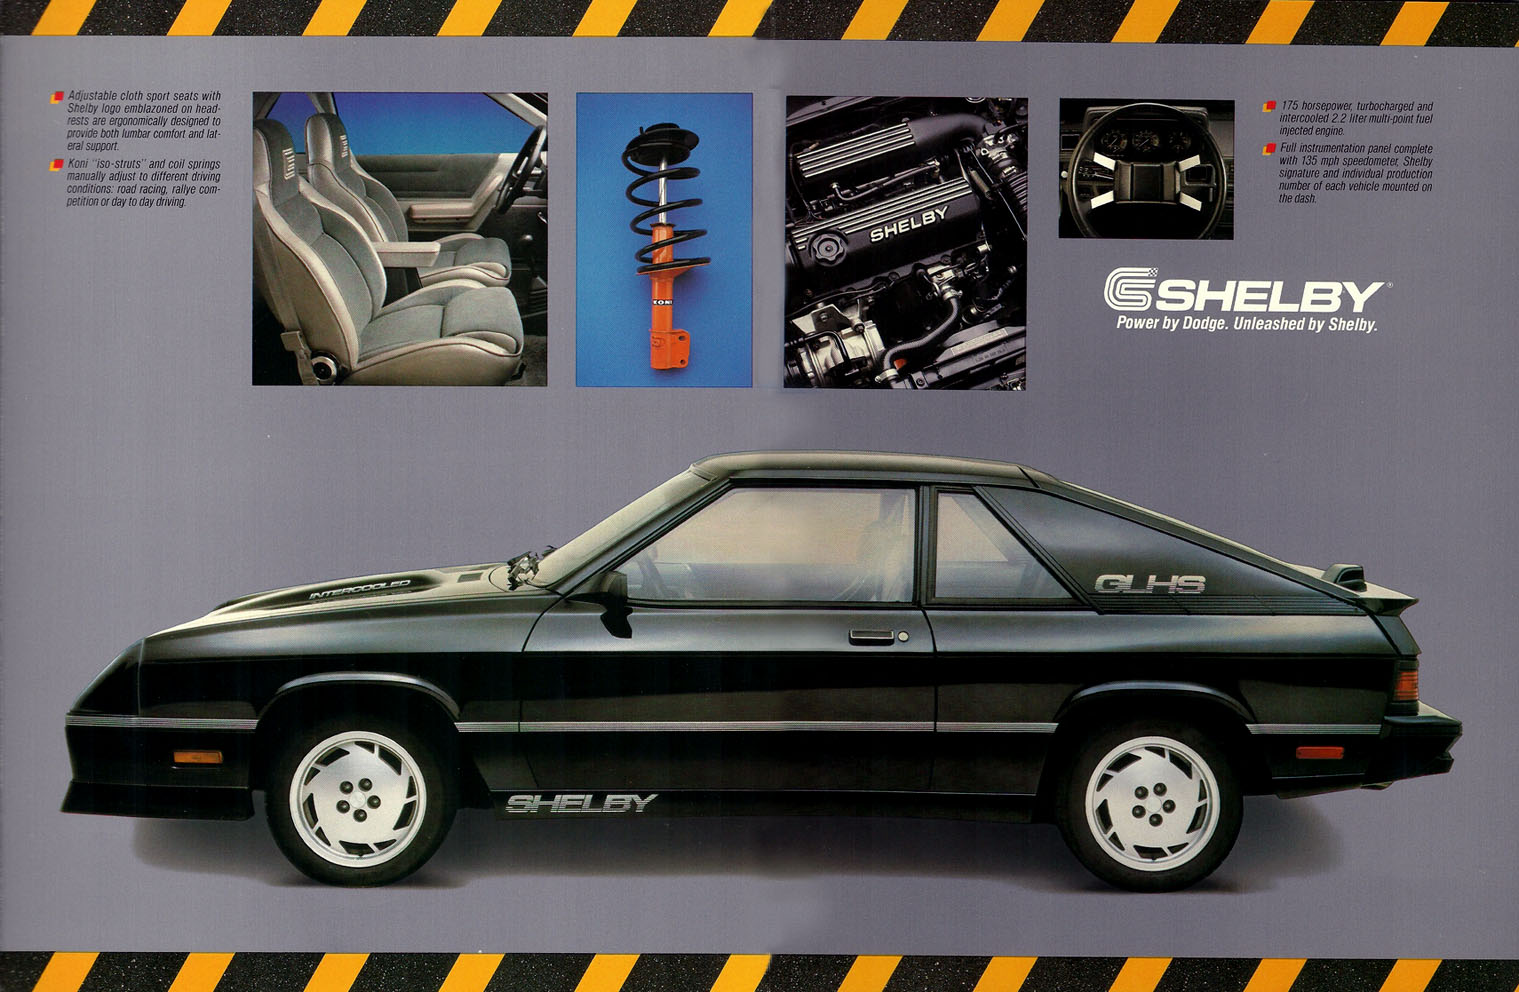 1987 Dodge Shelby Charger - 04-05